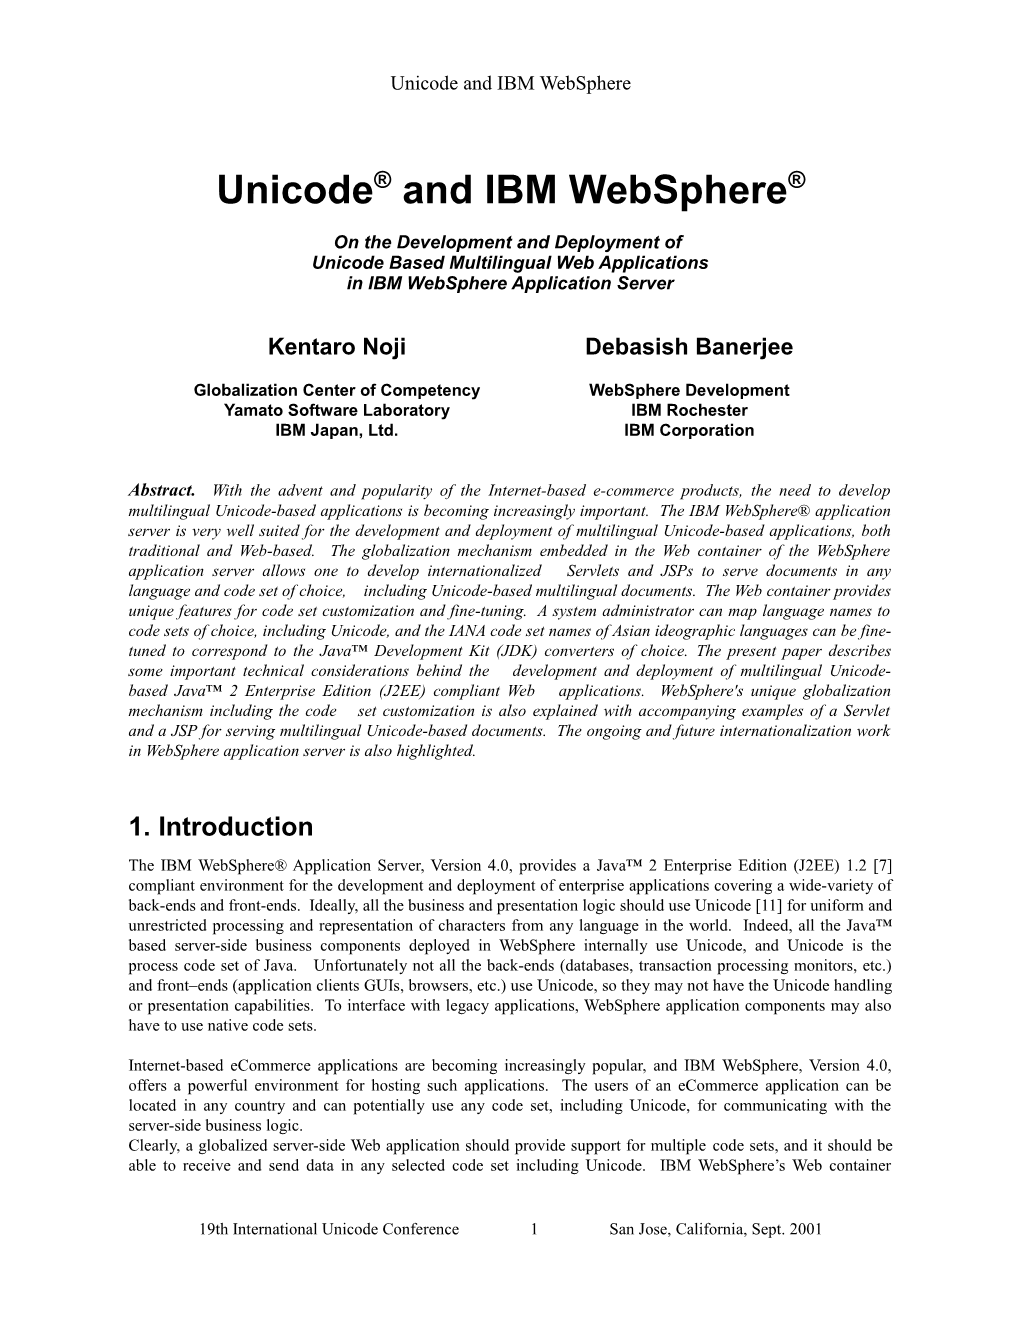 On the Development and Deployment of Unicode Based　Multilingual Web Applications in IBM